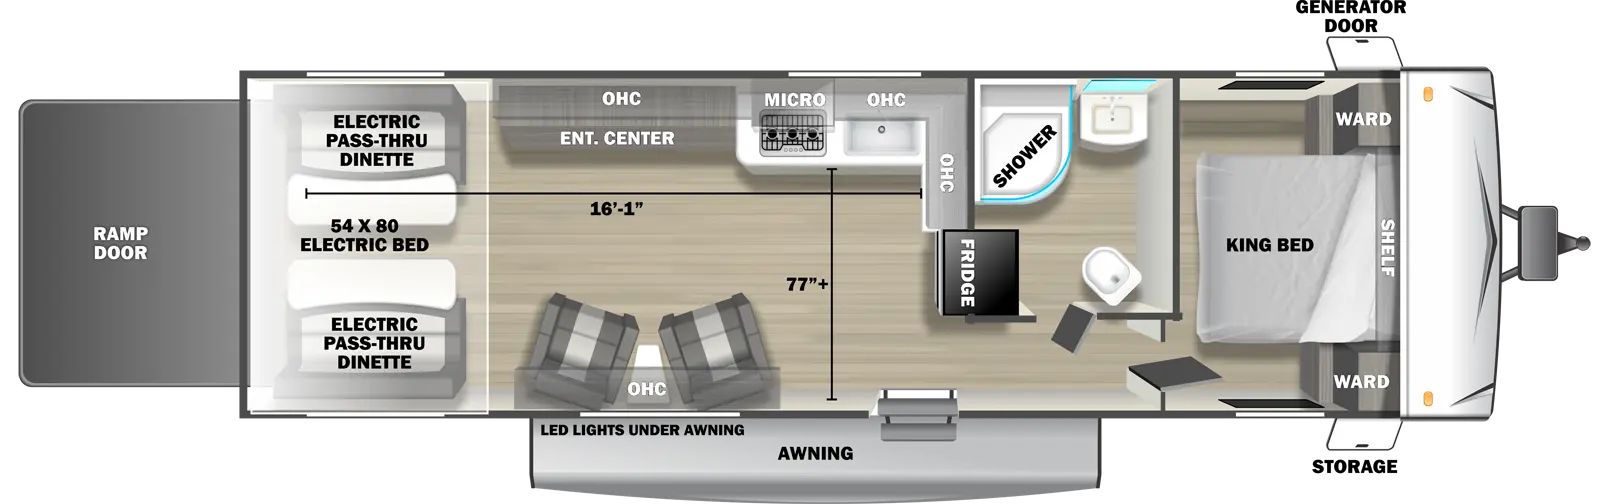 The 2730SRX travel trailer has no slide outs, 1 entry door and 1 rear ramp door. Exterior features include an awning with LED lights, front door side storage and front off-door side generator door. Interior layout from front to back includes: front bedroom with foot-facing King bed, shelf over the bed, and front corner wardrobes; off-door side bathroom with shower, linen storage, toilet and single sink vanity; off-door side kitchen with L-shaped countertop, overhead microwave, overhead cabinets, sink and rear facing refrigerator; door side overhead cabinet over 2 recliners with end table; off-door side entertainment center with overhead cabinet; and rear 54 x 80 electric bed over electric pass-through dinette. Cargo length from rear of unit to kitchen countertop is 16 ft. 1 in. Cargo width from kitchen countertop to door side wall is 77 inches.